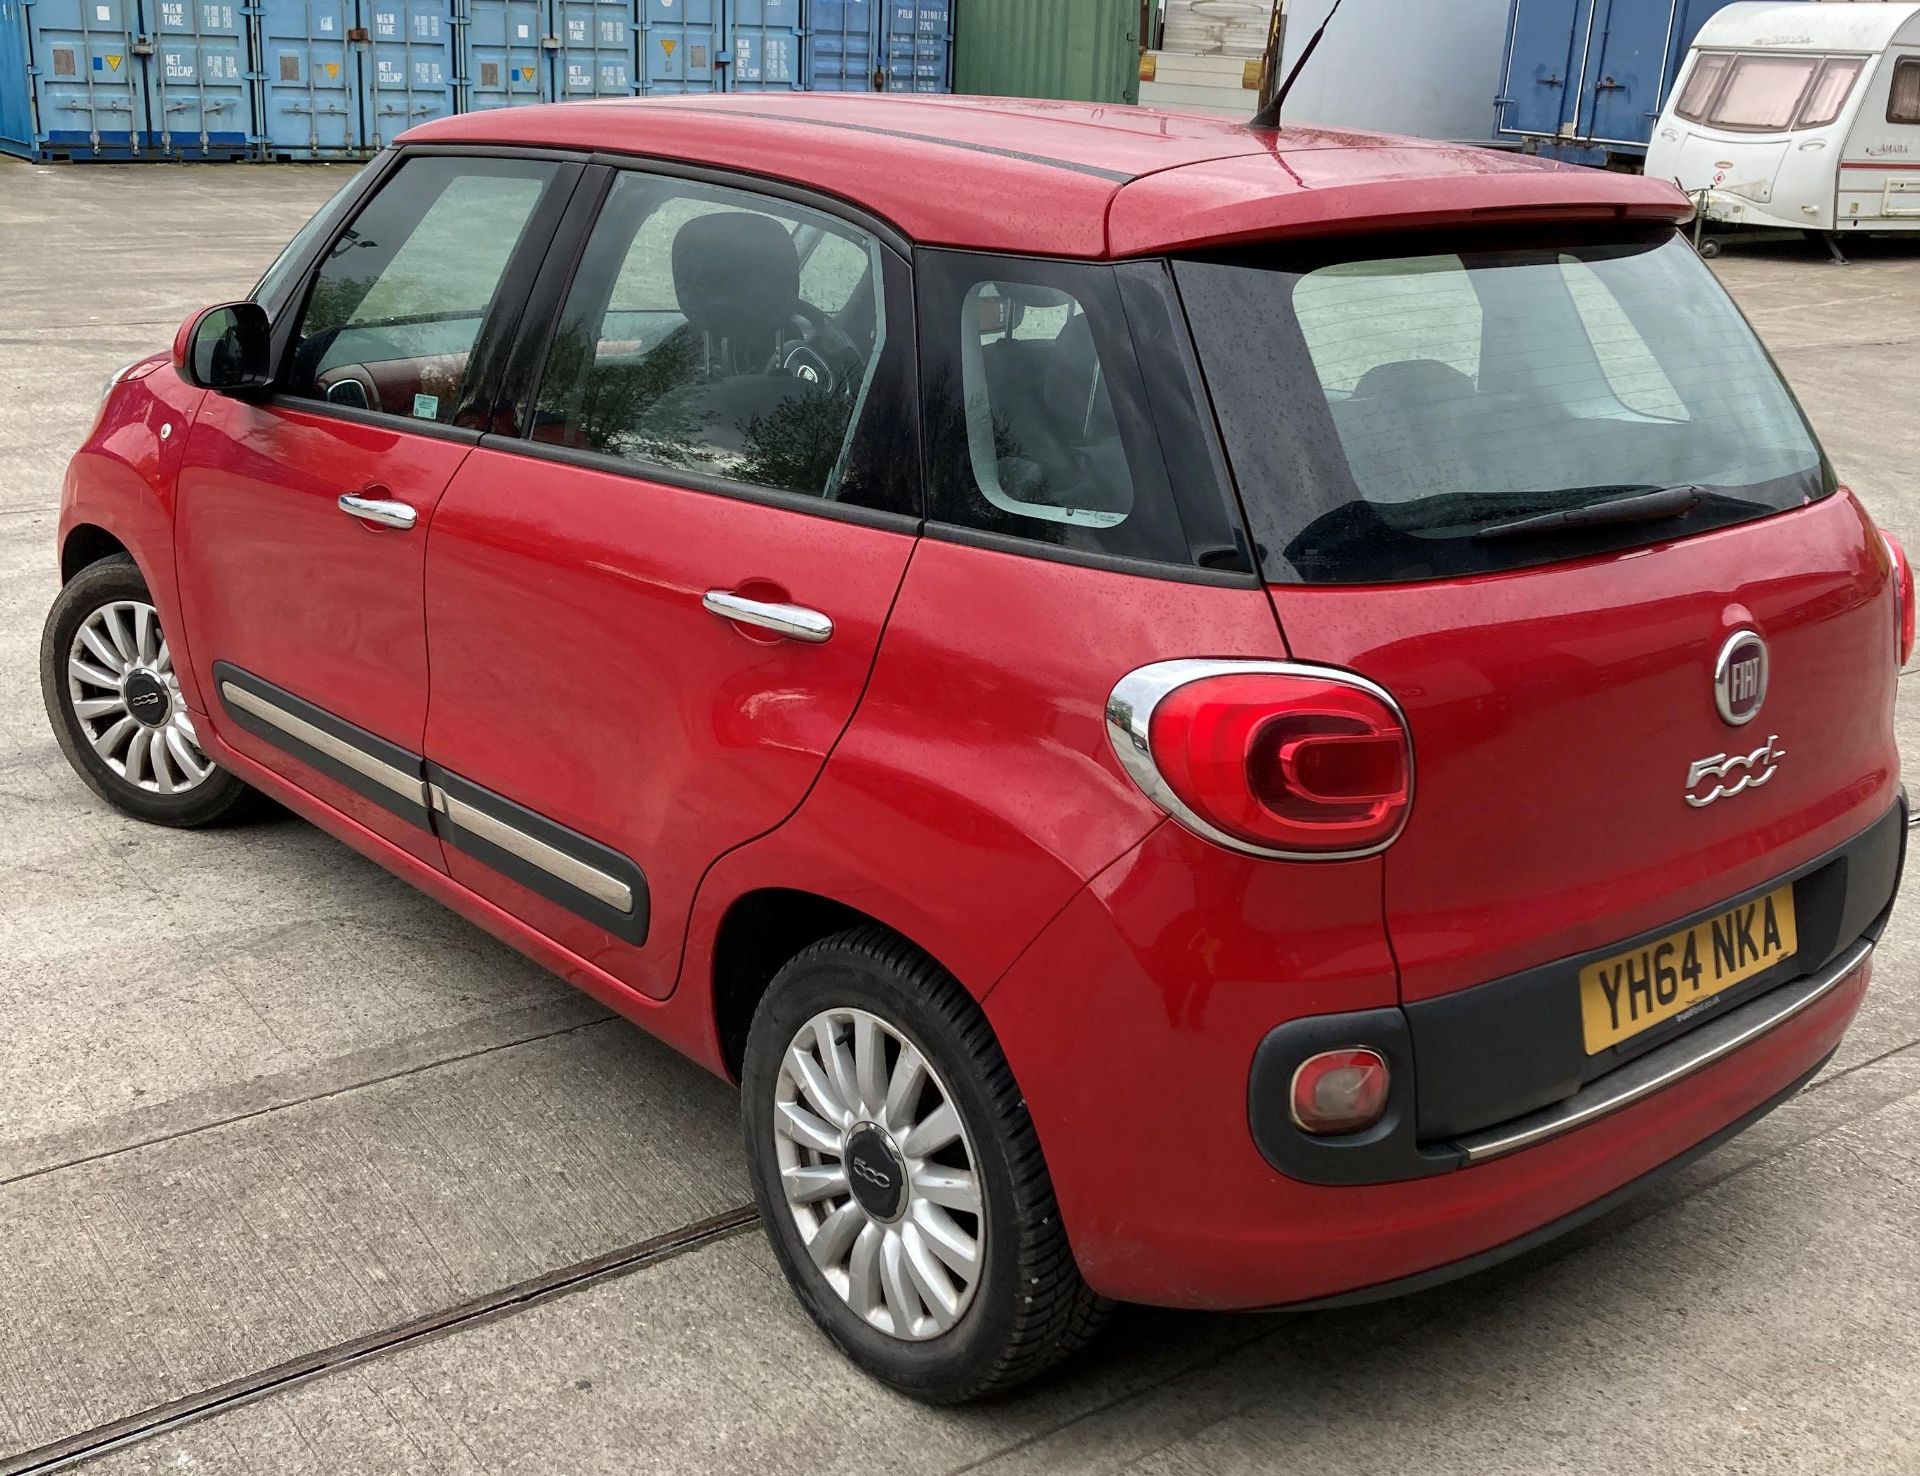 FIAT 500L POP STAR MULTI-JET 1.2 MPV - DIESEL - RED. On the instructions of: A retained client. - Bild 6 aus 16